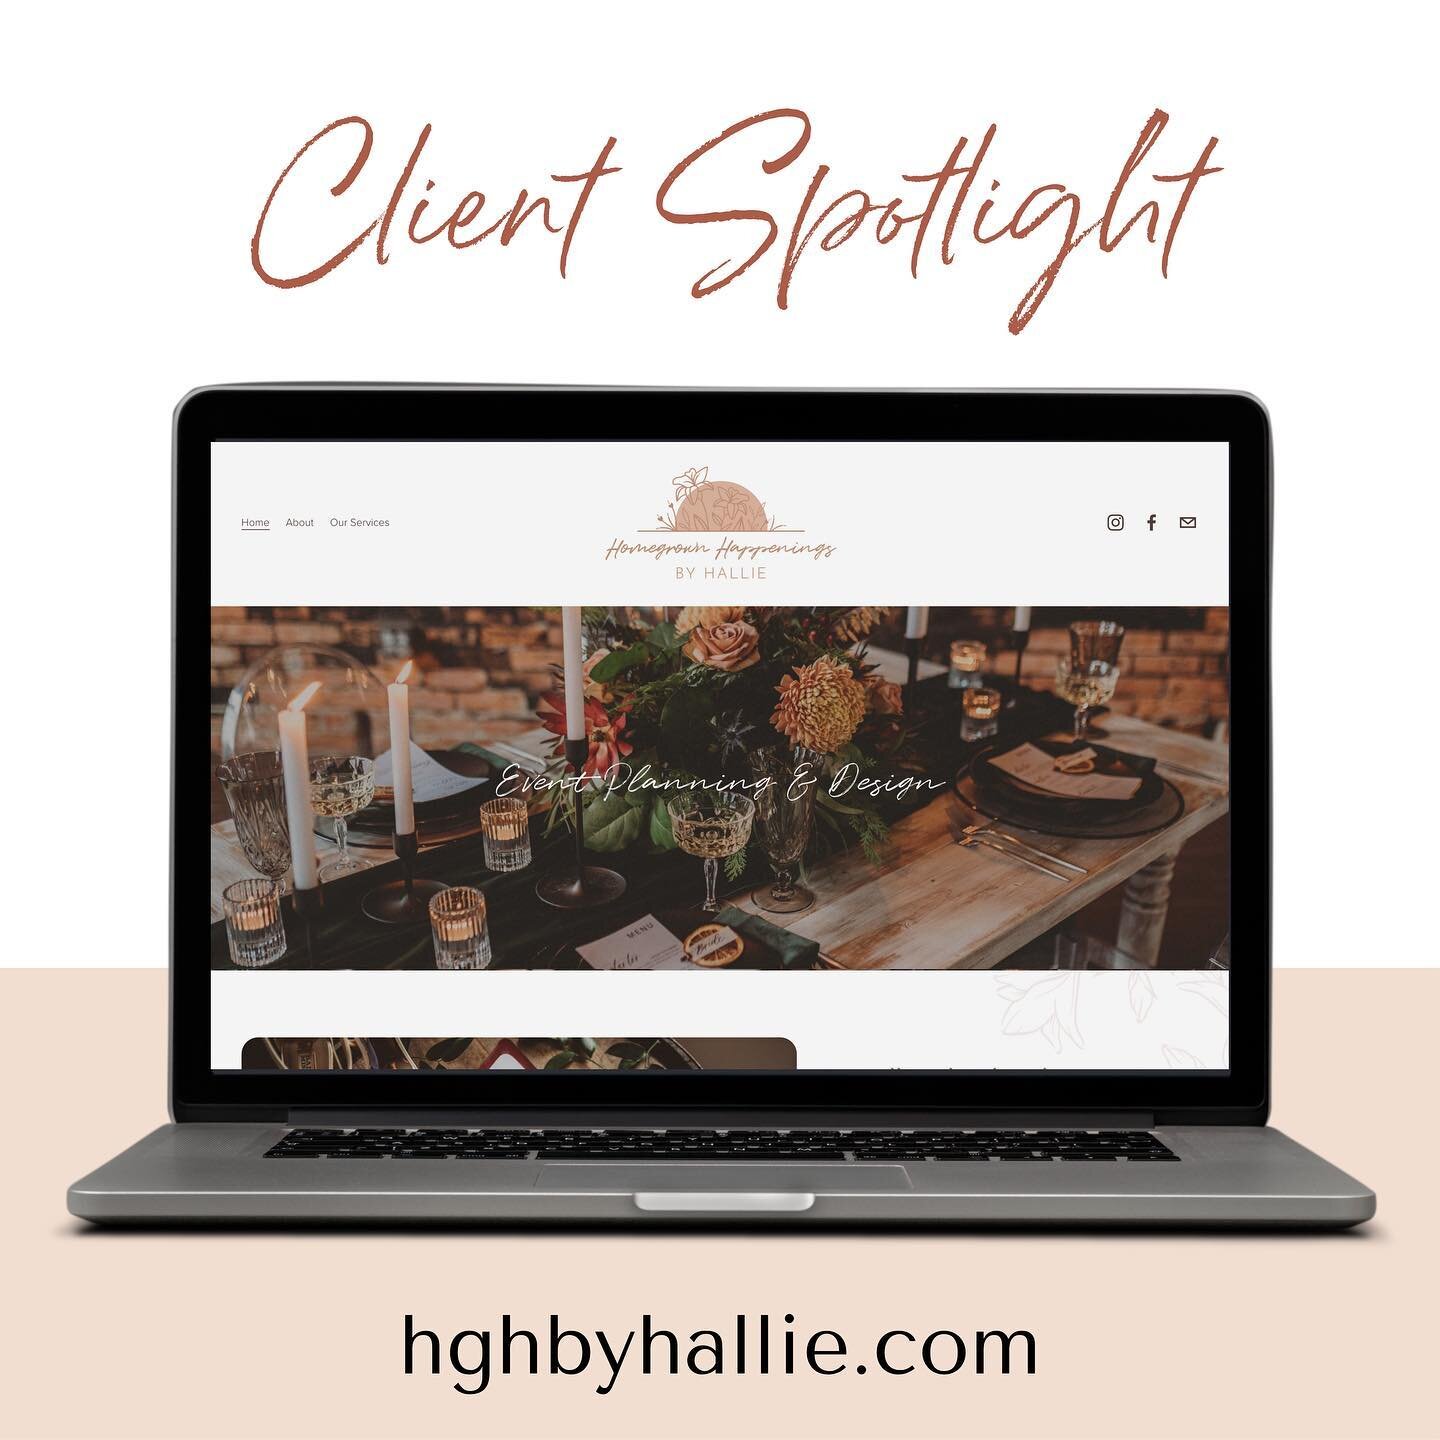 Meet Hallie, the mind behind @homegrown.happenings. When she's not in the operating room as a Surgical Tech, she's planning epic weddings and events in Virginia. Check out her website hghbyhallie.com

#clientspotlight #clientlove #womenownedbusiness 